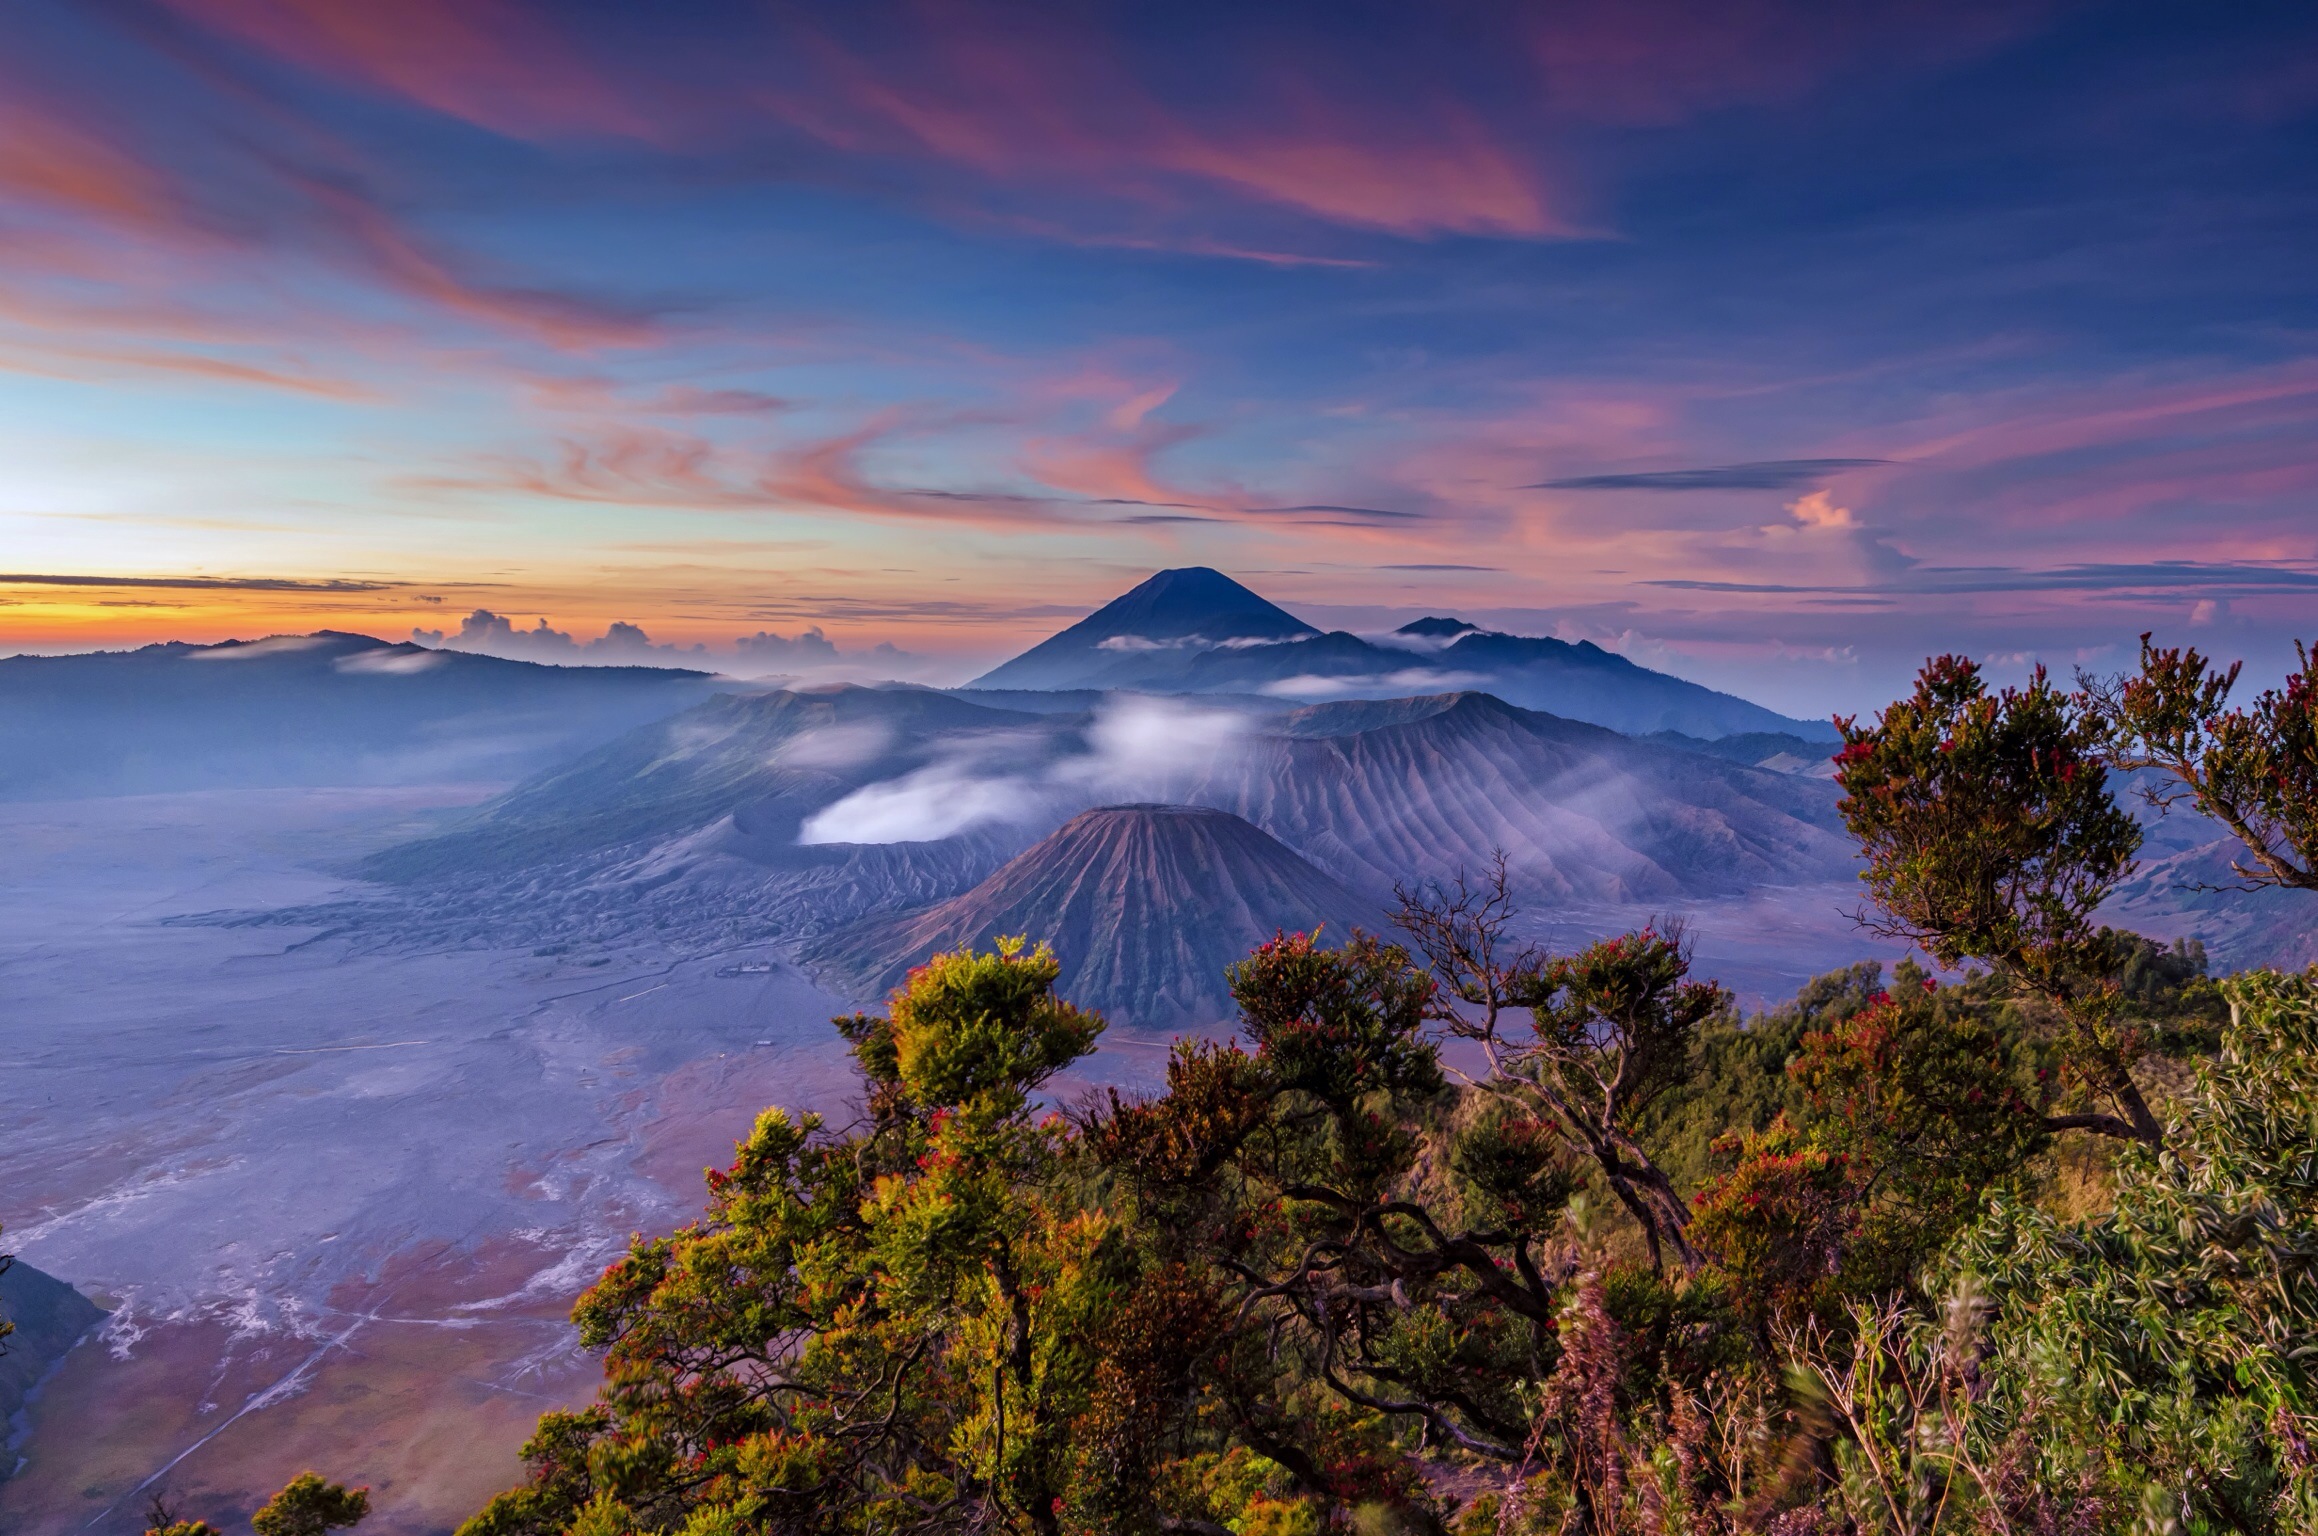 Bromo Mountain by Rivan Indra